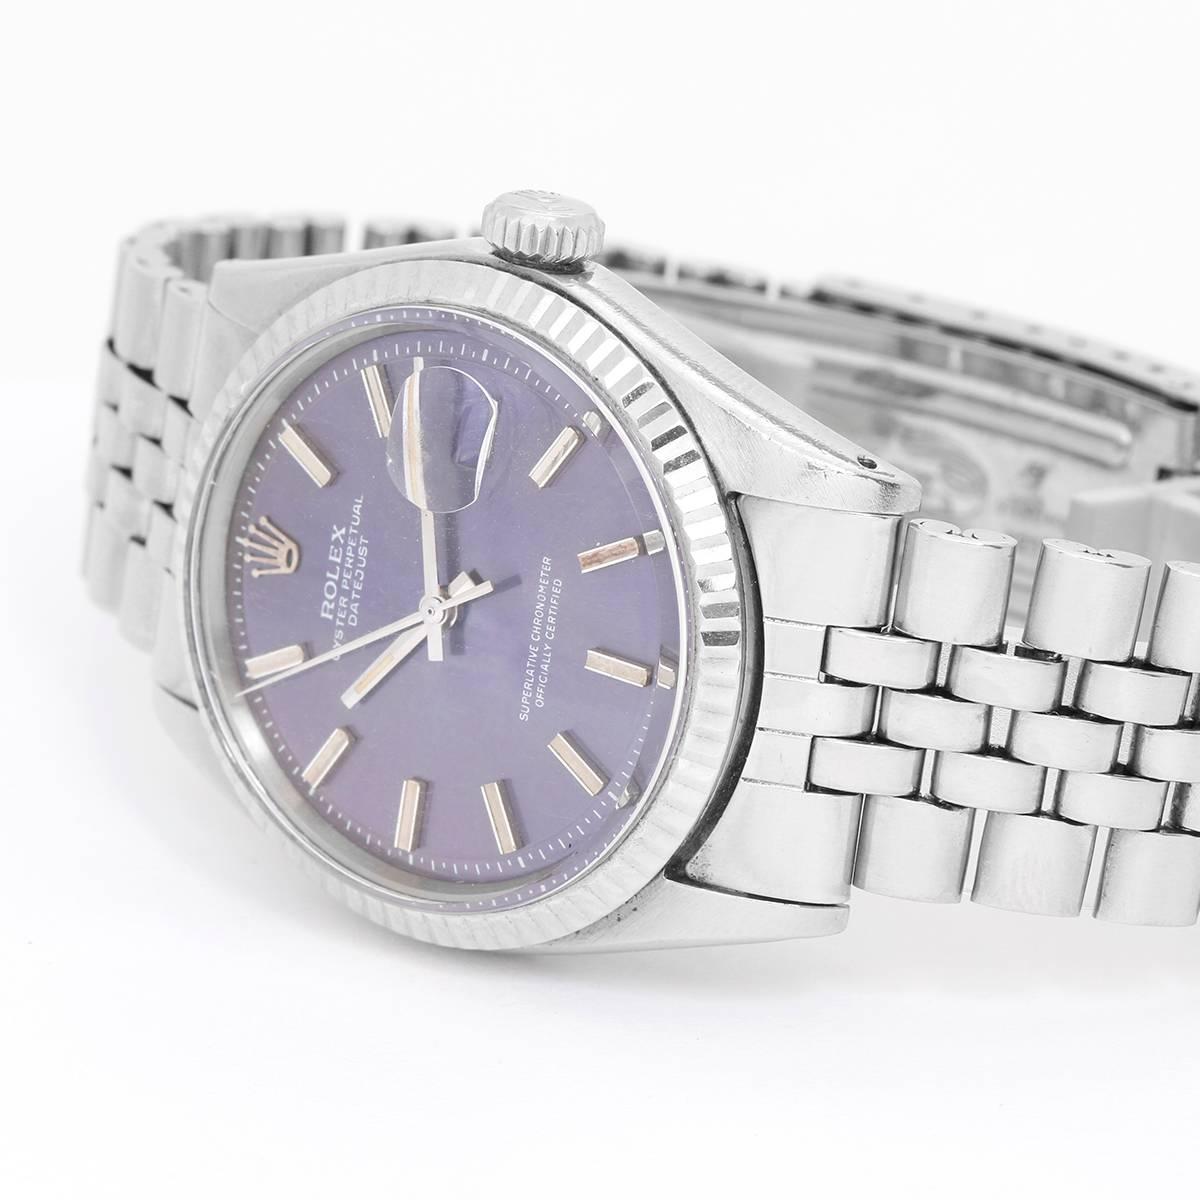  Automatic winding, acrylic crystal. Stainless steel case with white gold fluted bezel (36mm diameter). Original very rare tropical blue dial turned purple with light and age with stick markers. Stainless steel Jubilee bracelet. Pre-owned original